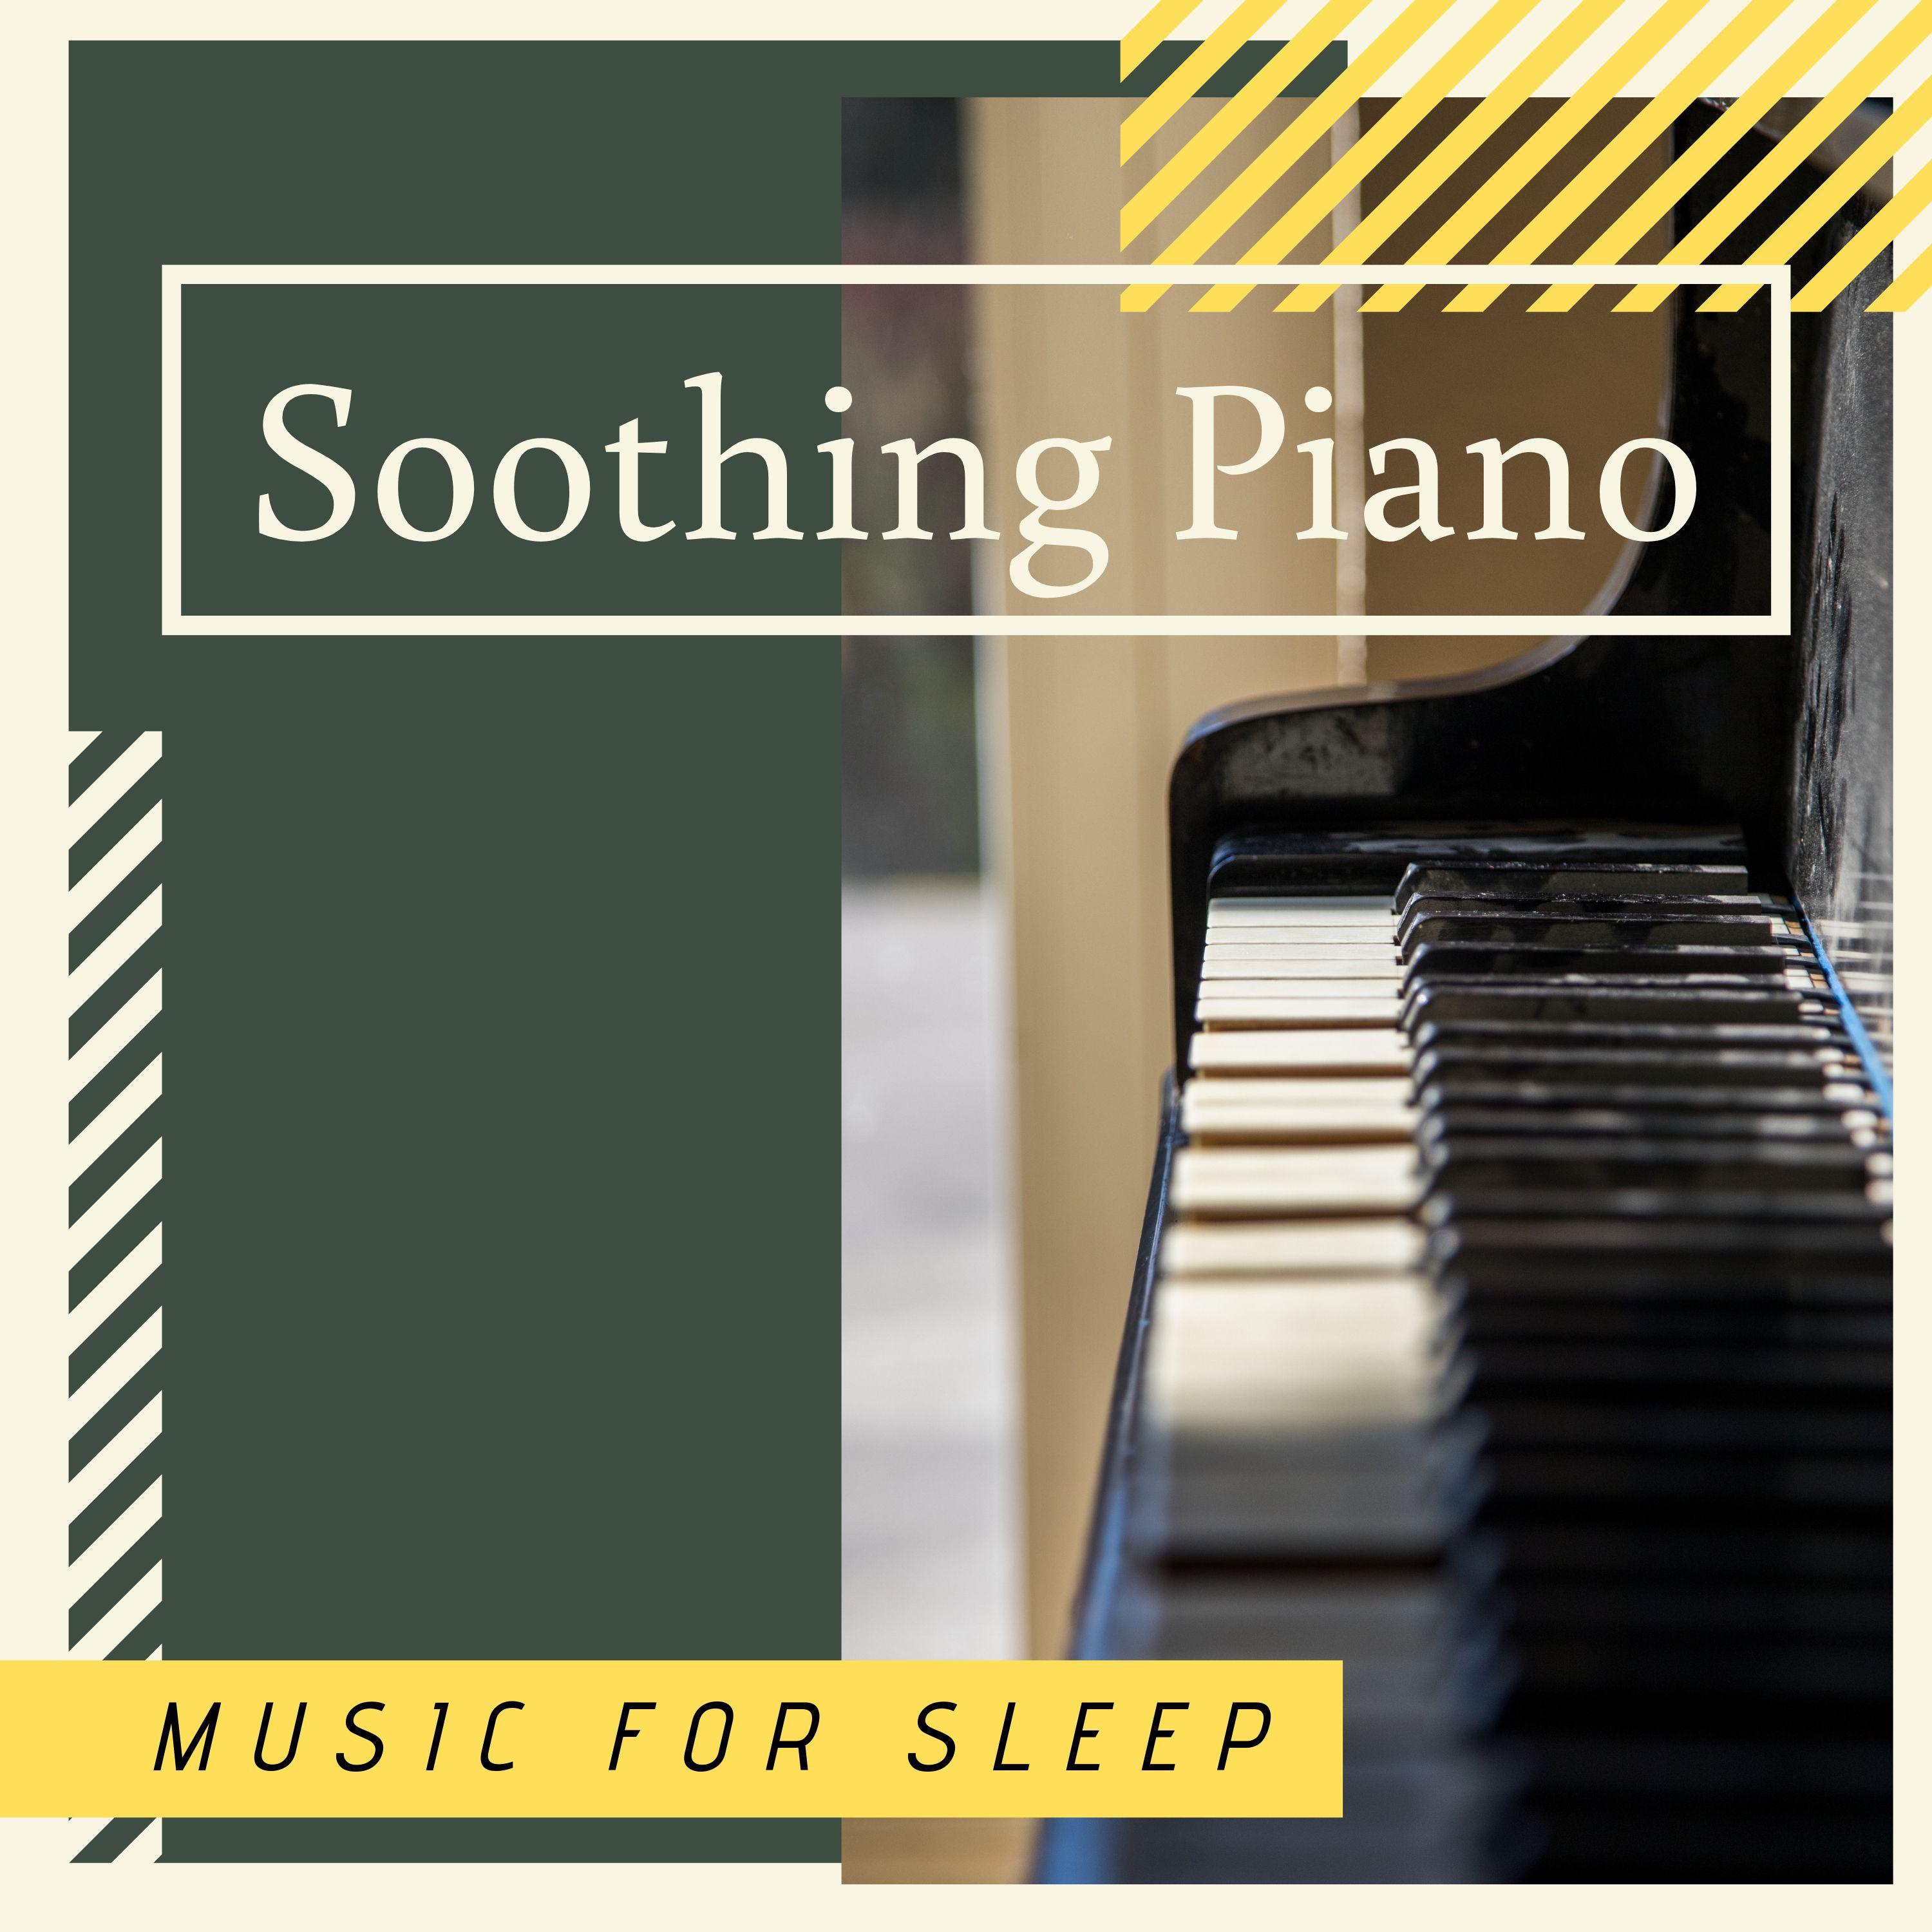 Soothing Piano Music for Sleep